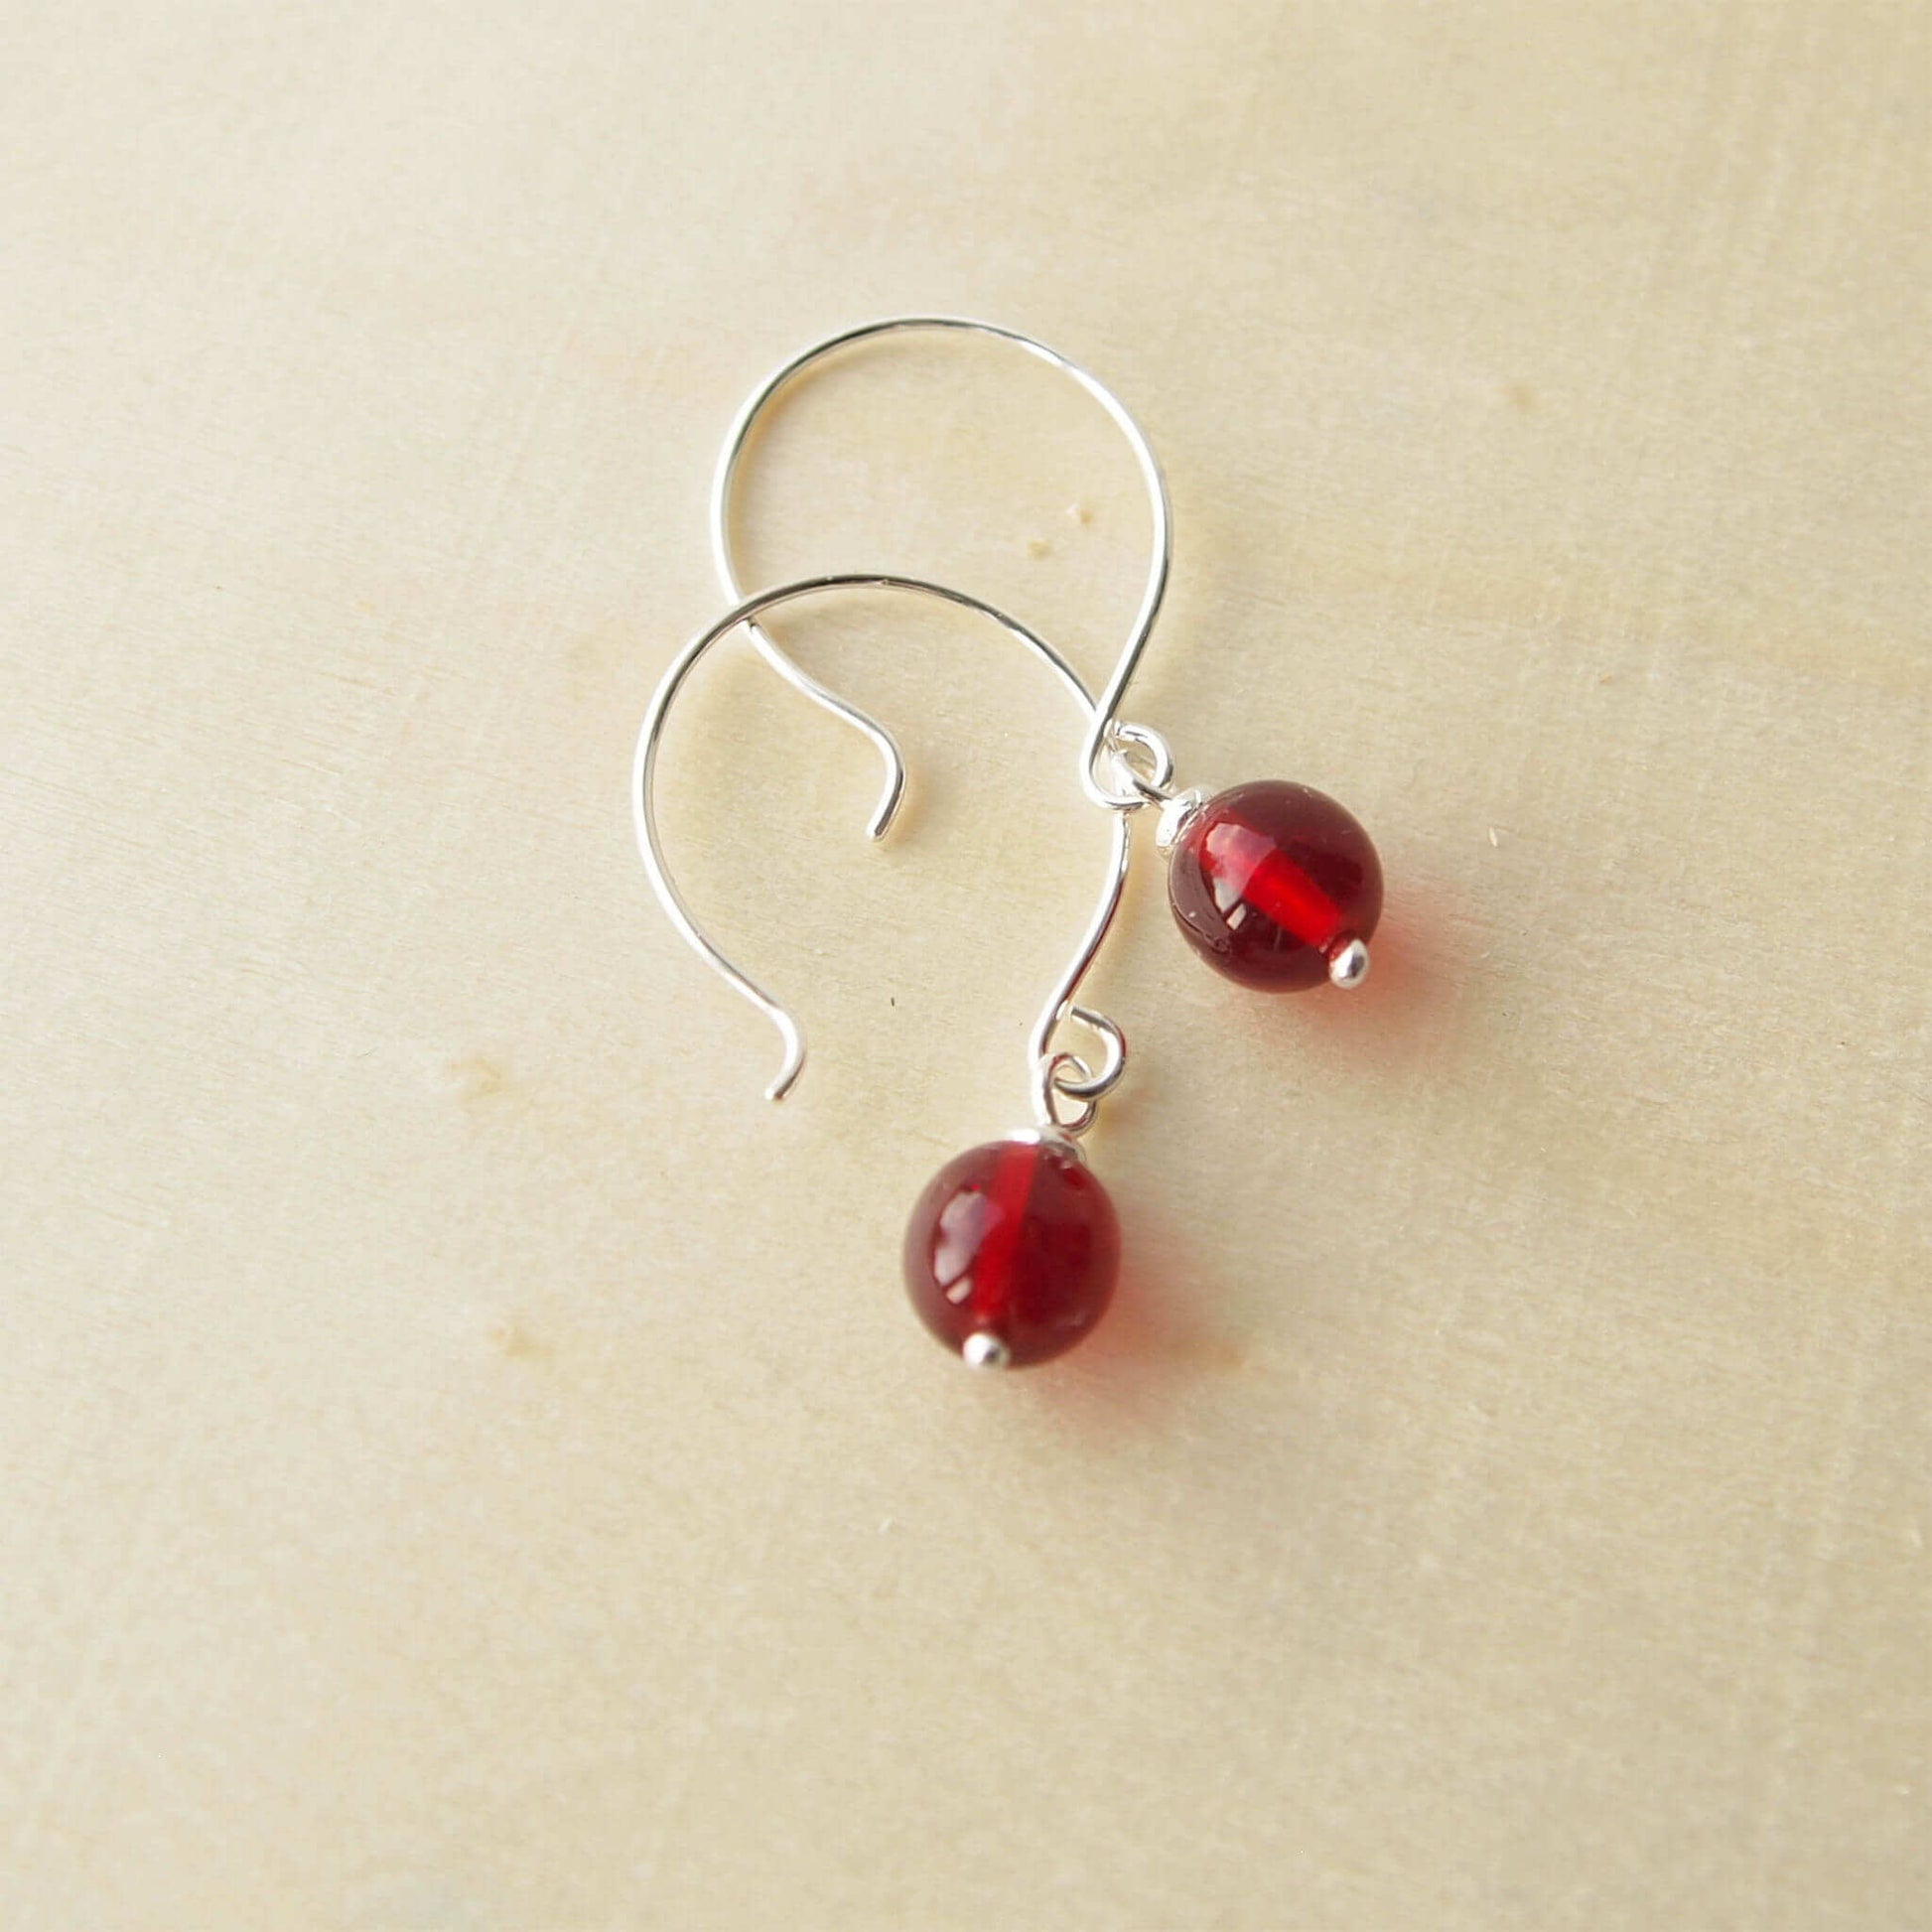 Red Silver minimalist handmade silver hoops. Handcrafted ear wires with a round glass bead dropper. Made in Scotland by maram jewellery